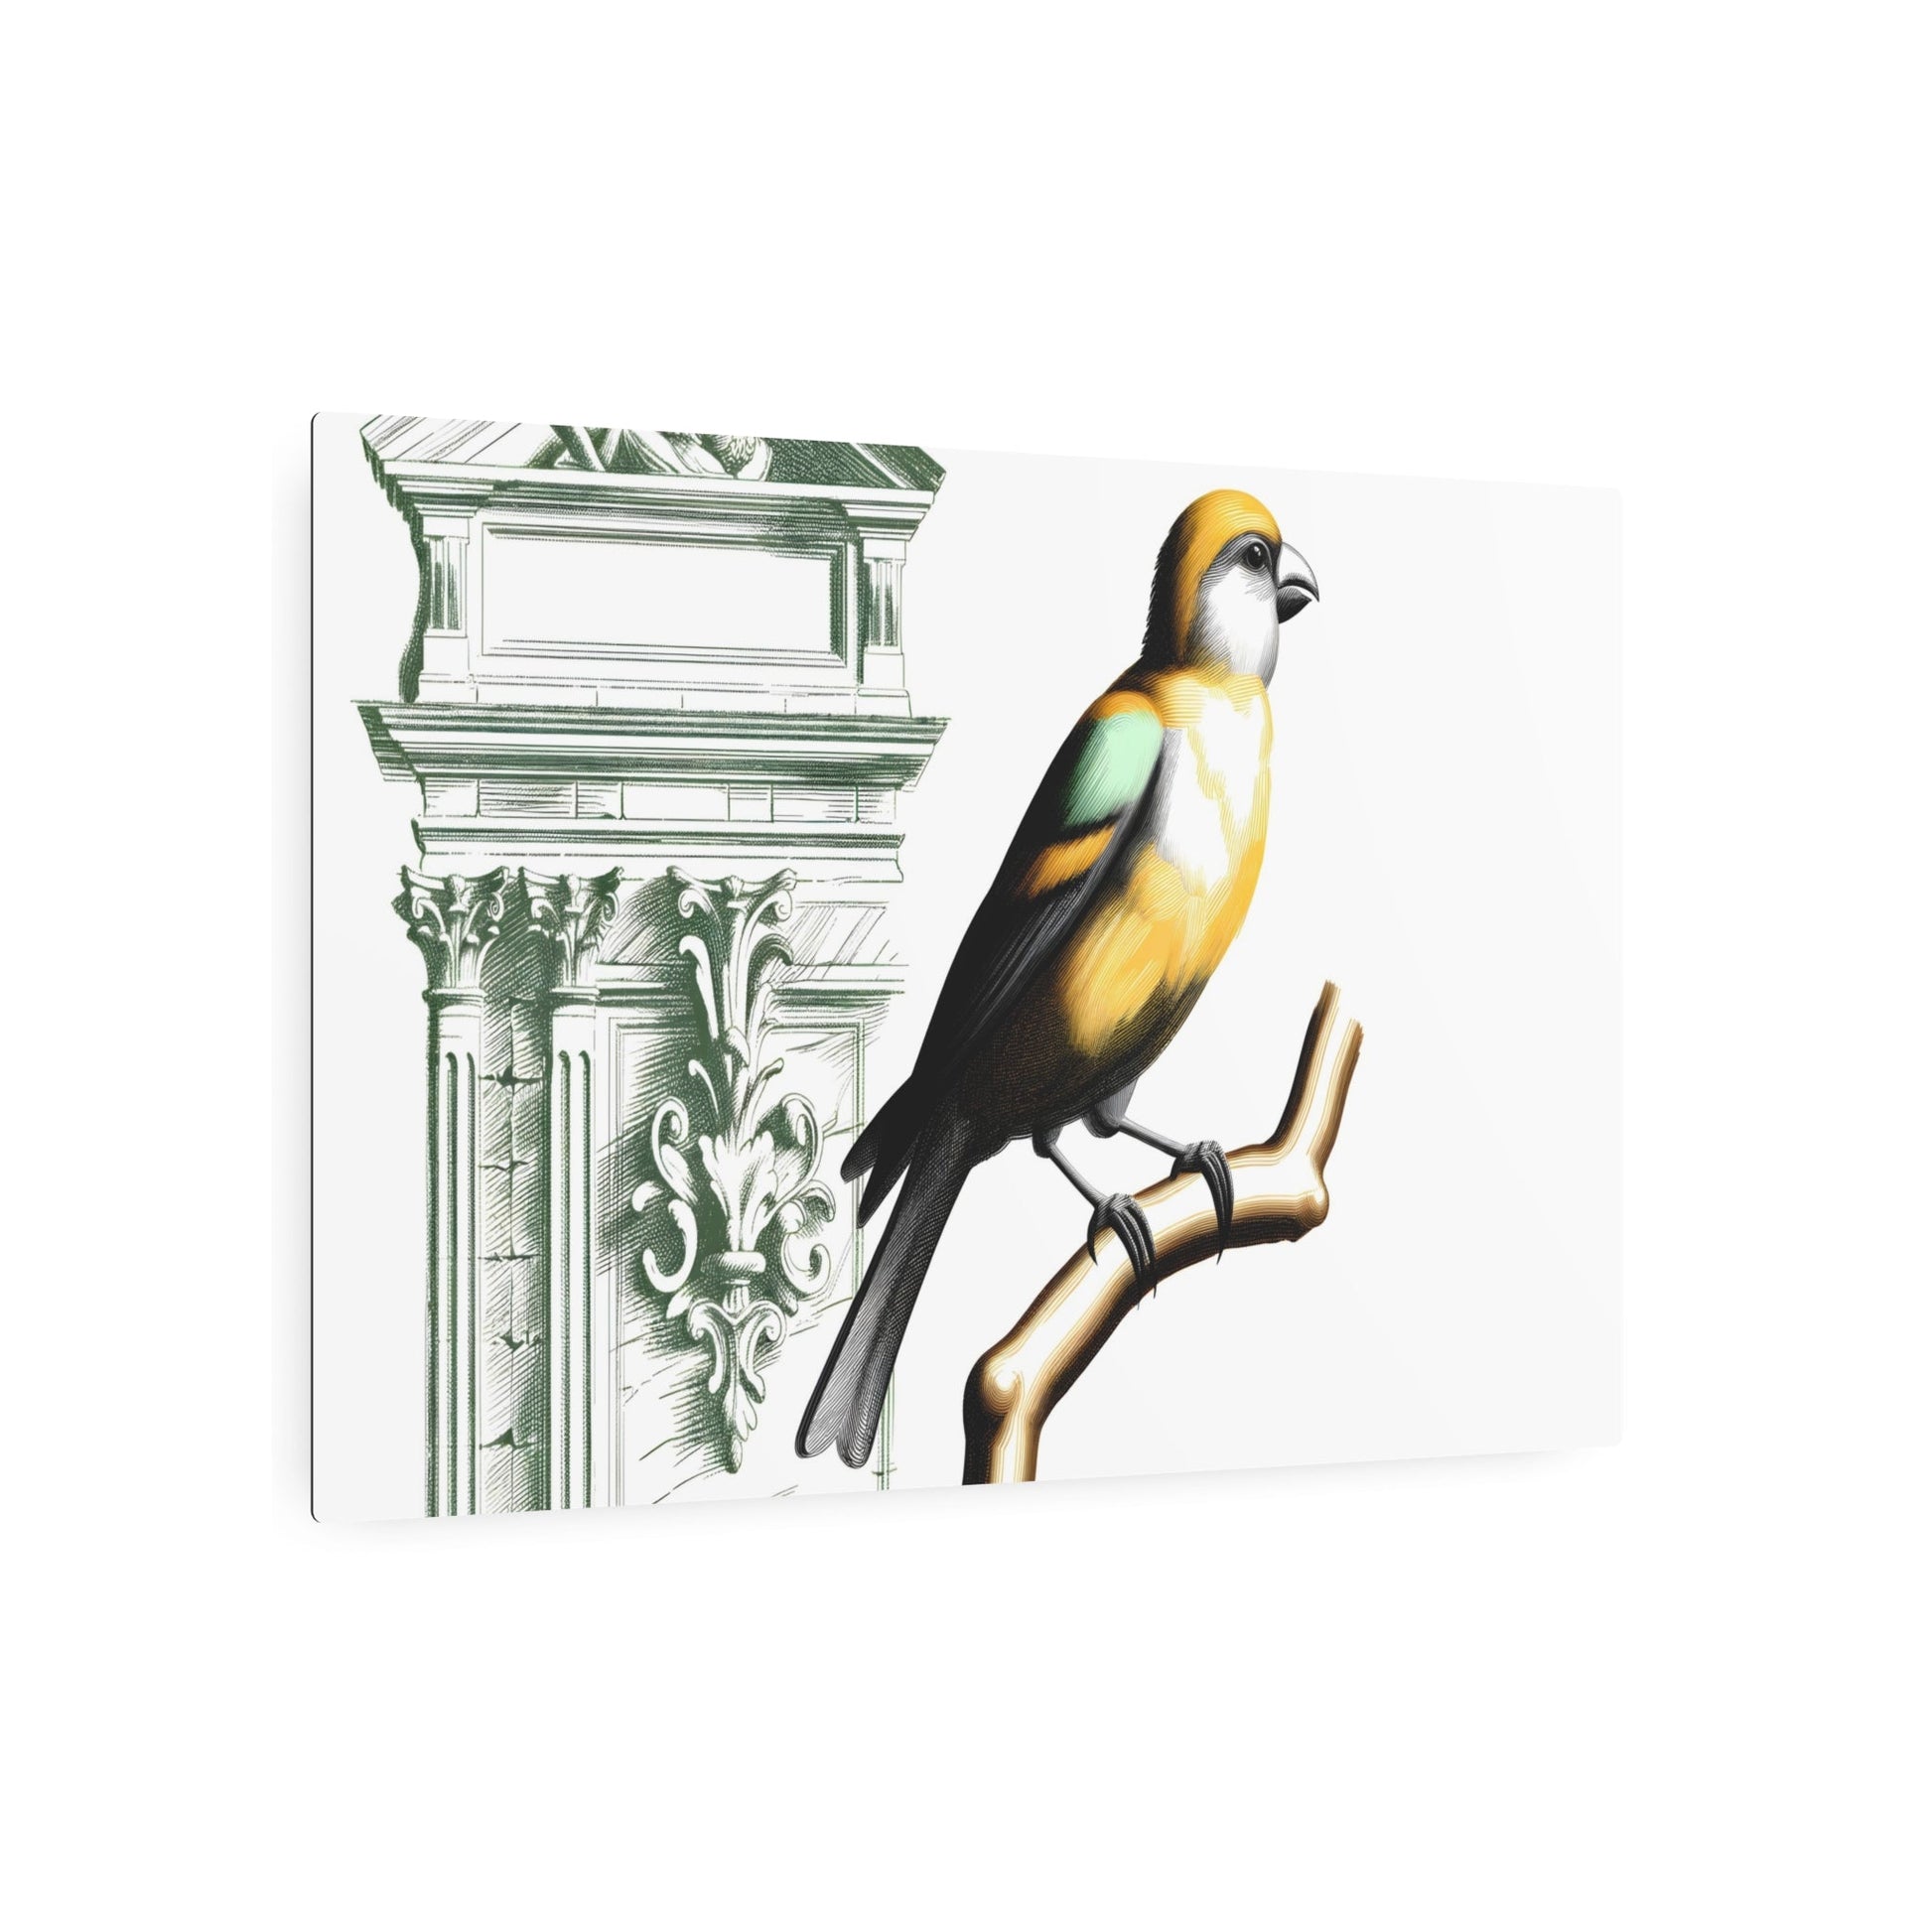 Metal Poster Art | "Neoclassical Style Western Art: Detailed Bird on Branch Scene with Architectural Elements and Dramatic Use of Light, Color, and Contrast" - Metal Poster Art 36″ x 24″ (Horizontal) 0.12''